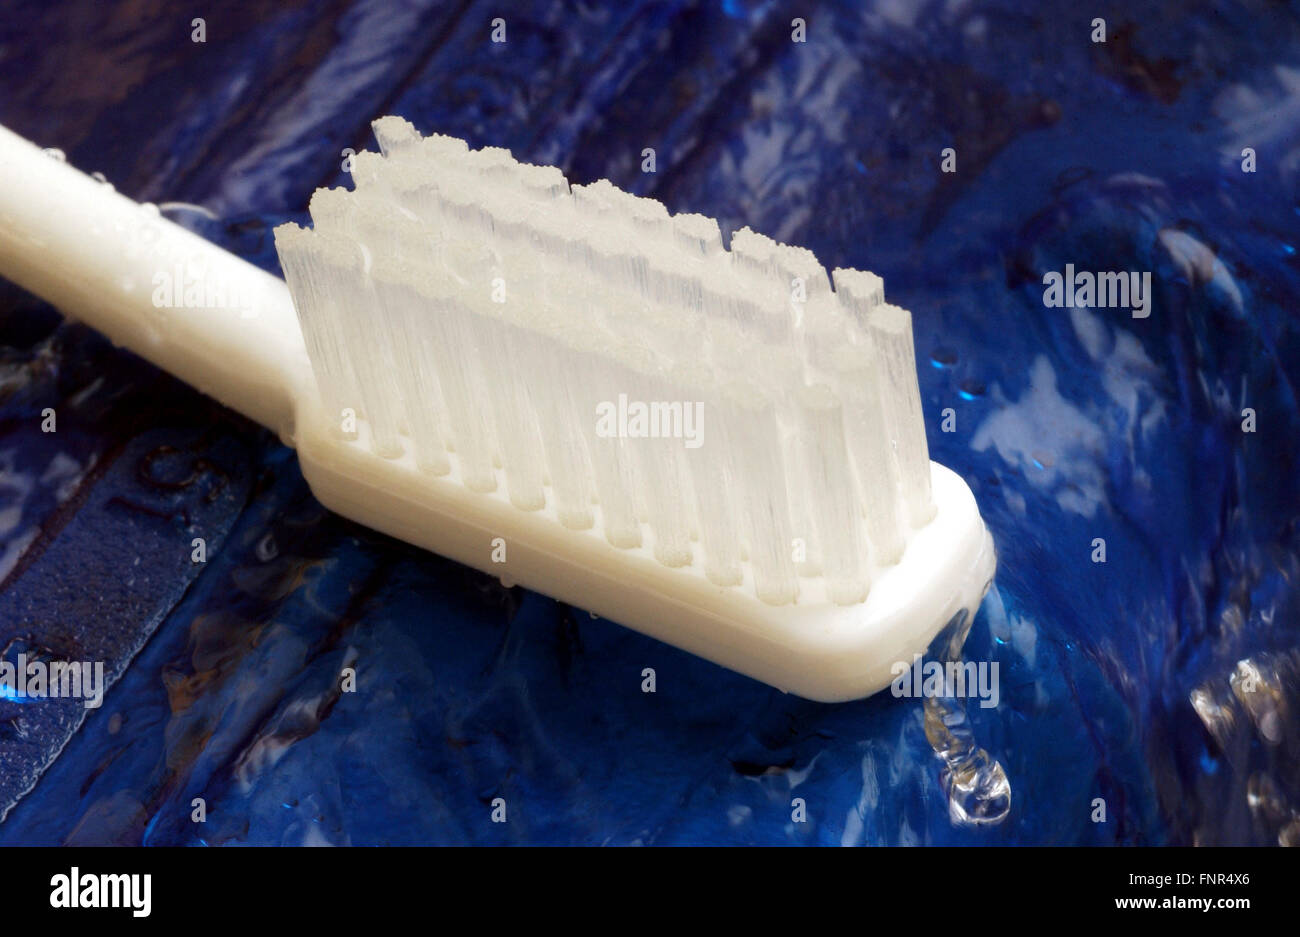 A white toothbrush lying in a pool of water. Stock Photo